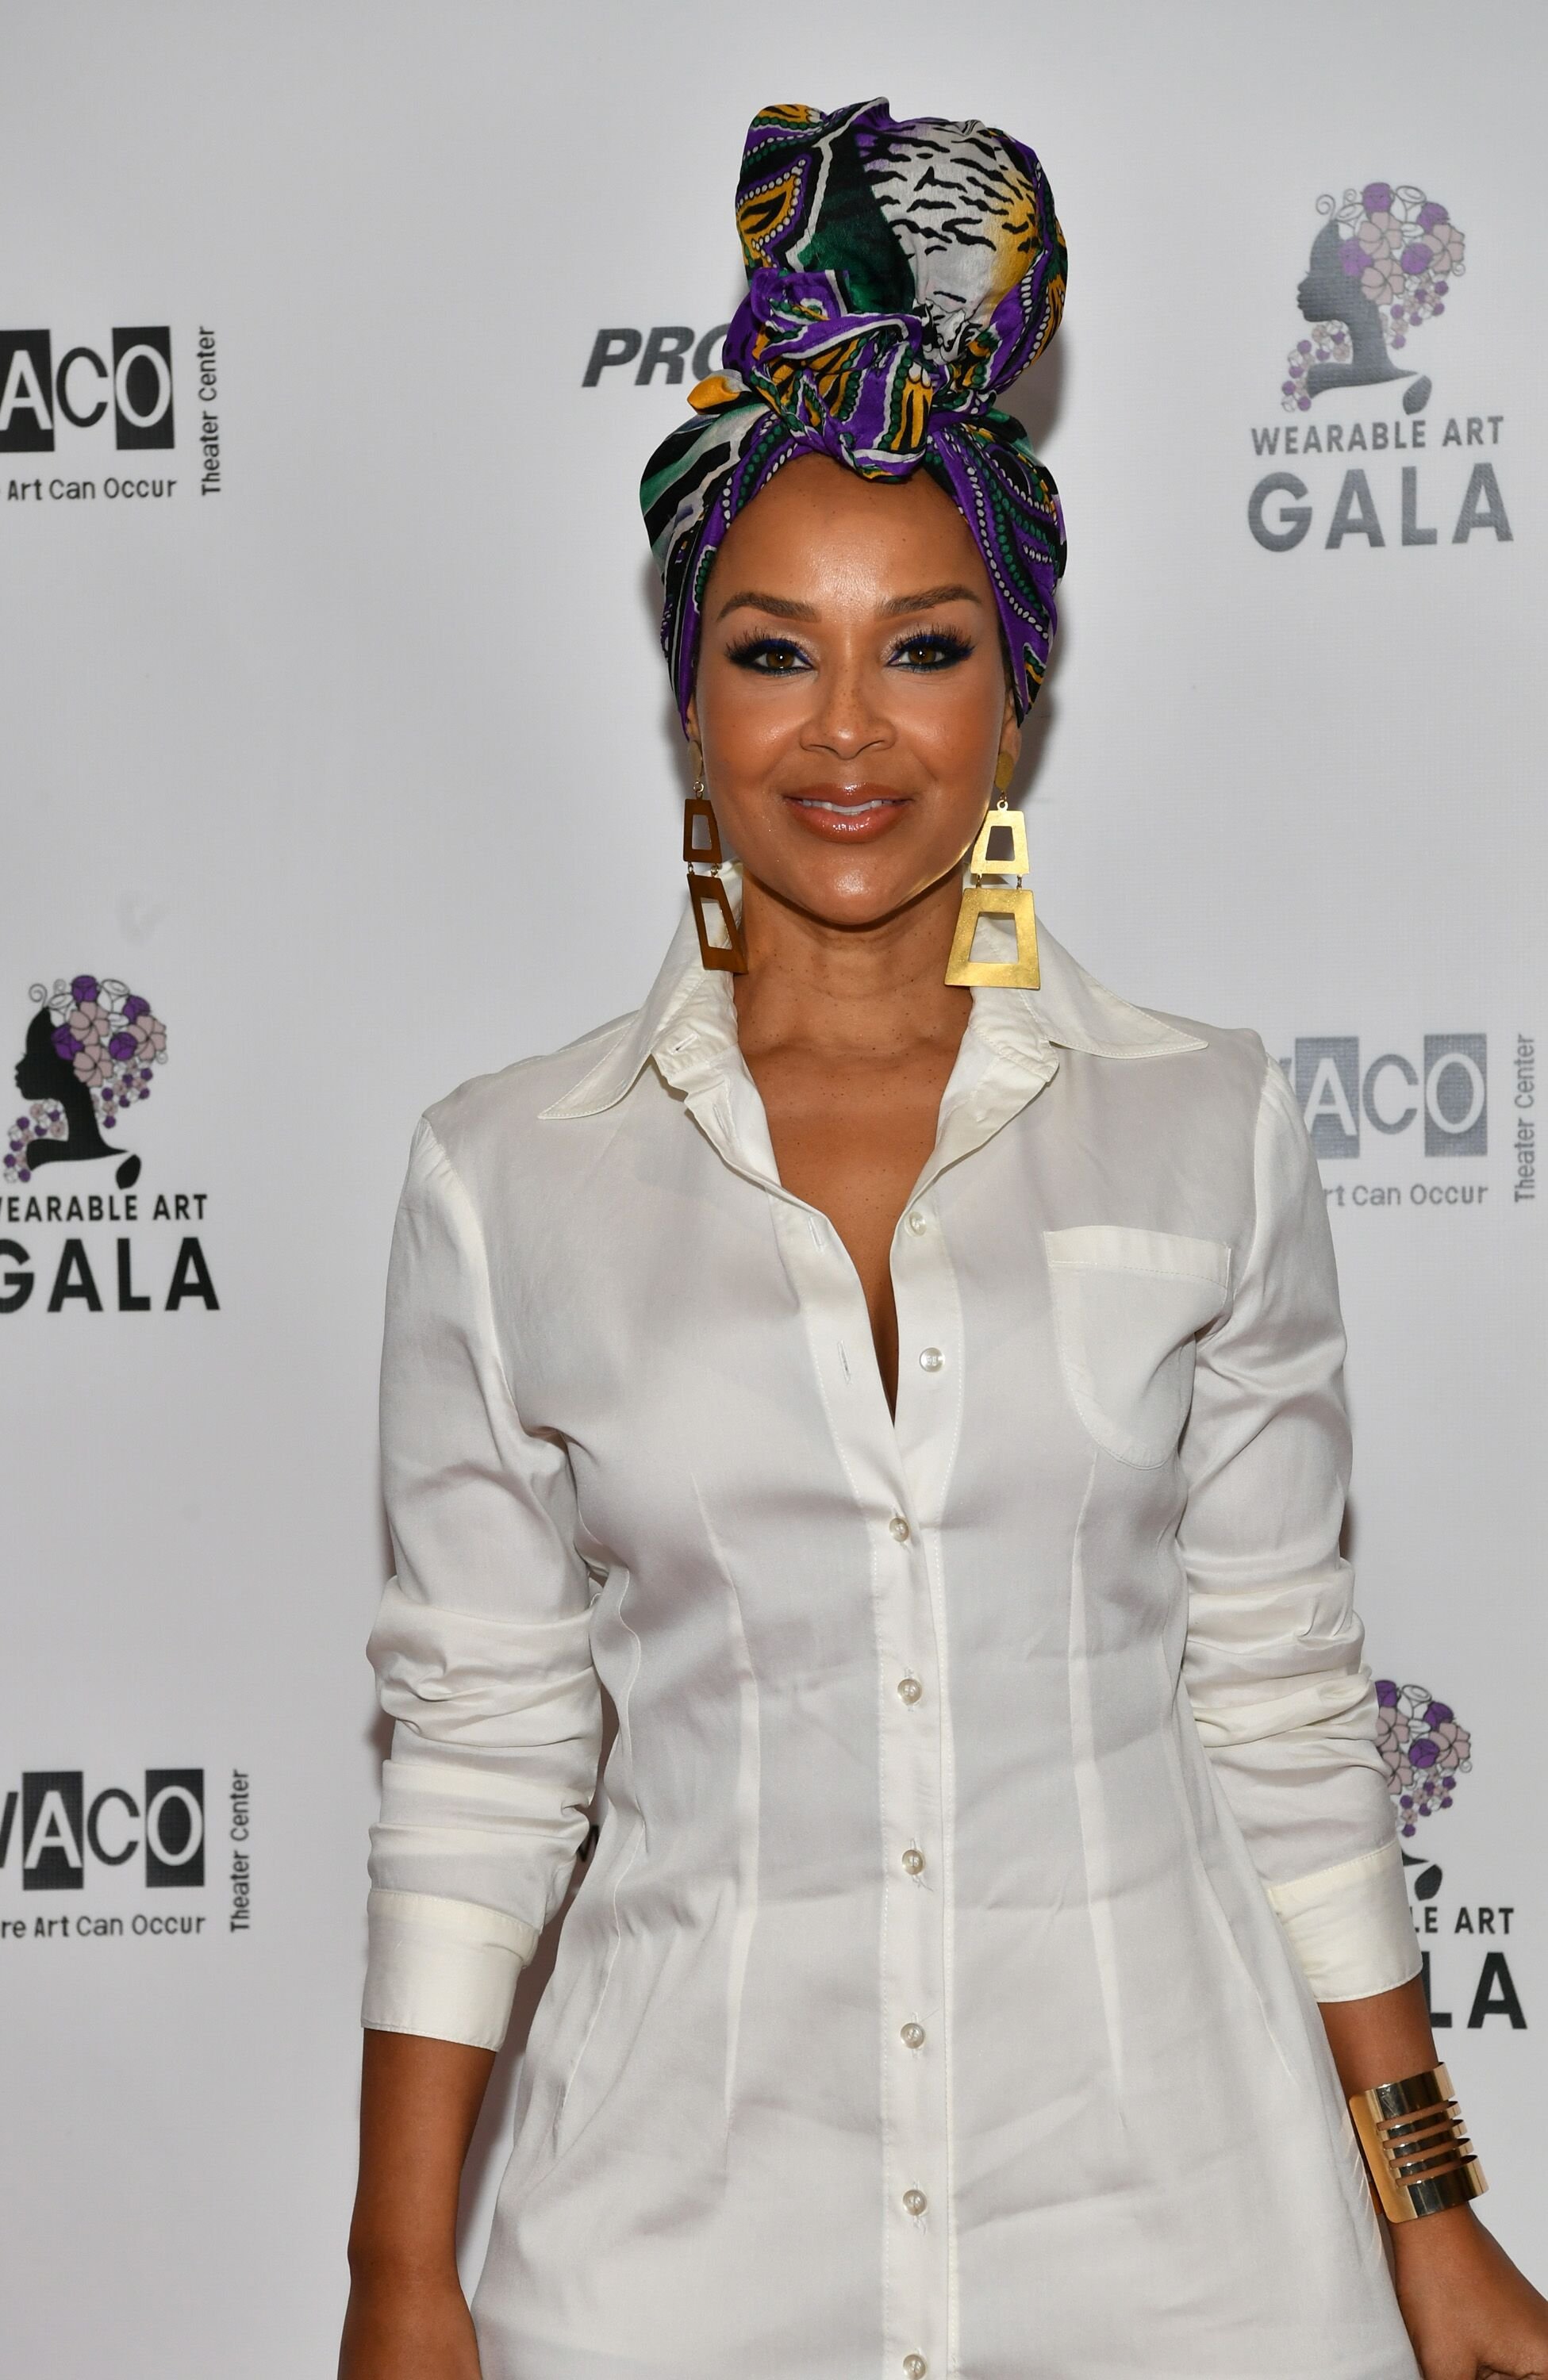 LisaRaye McCoy at WACO Theater's 2nd Annual Wearable Art Gala on March 17, 2018 in California | Photo: Getty Images